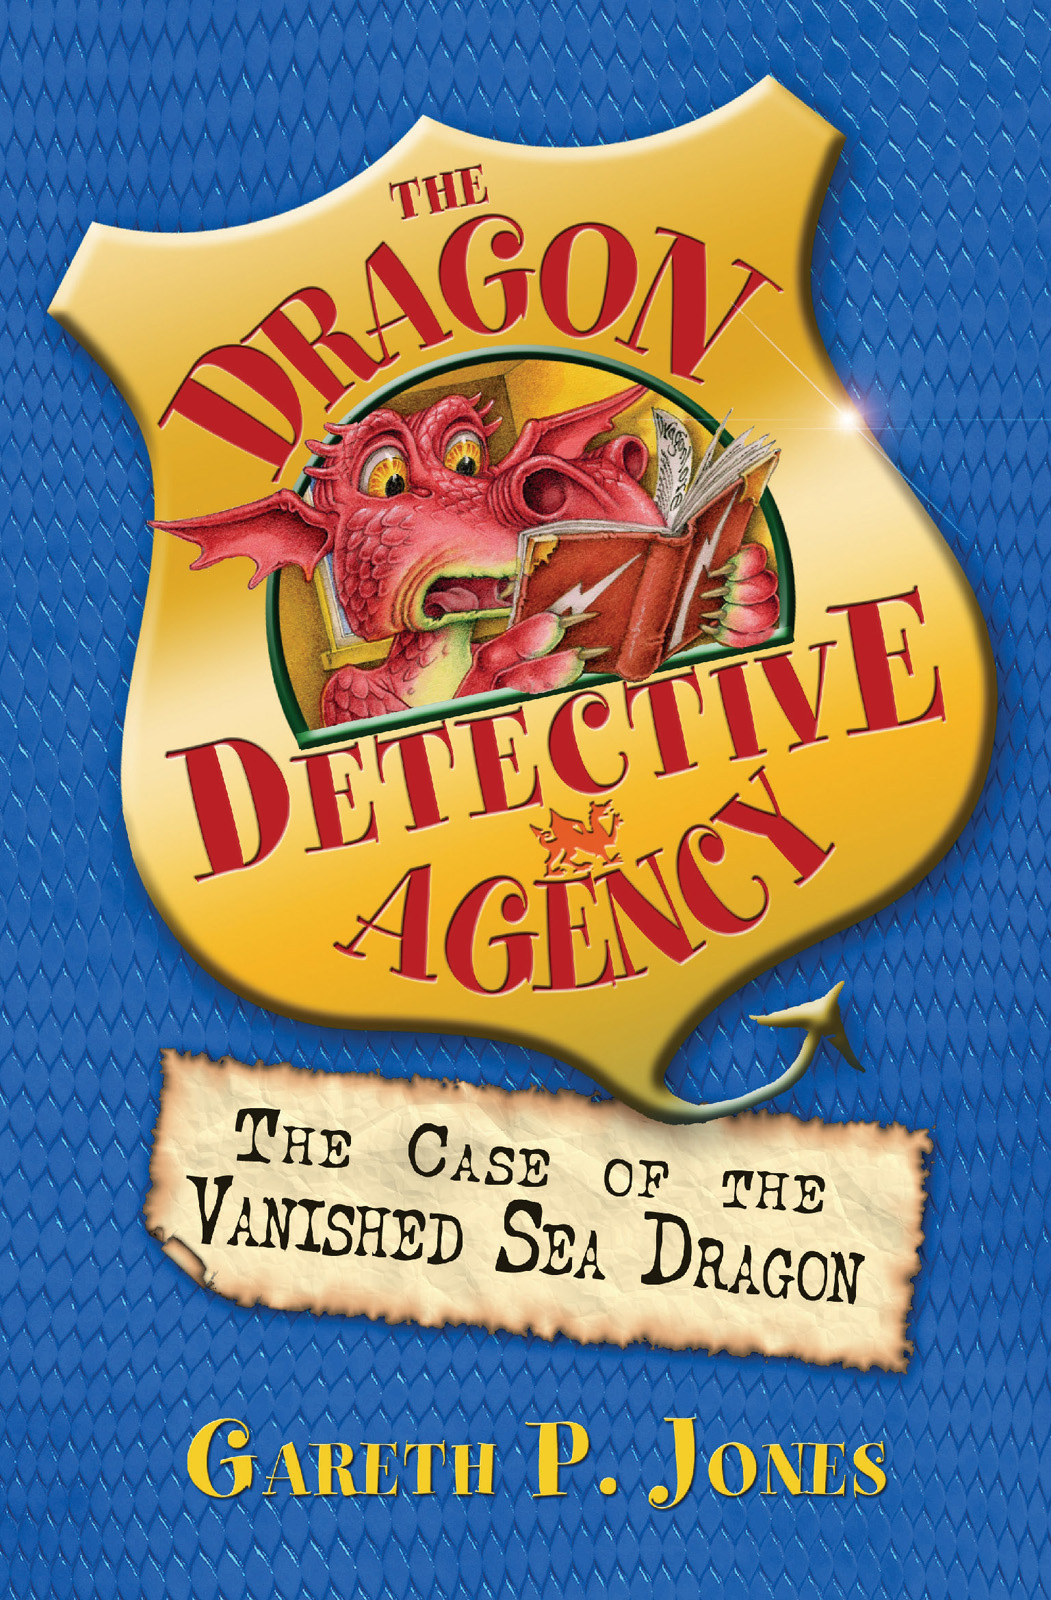 The Case of the Vanished Sea Dragon (2012) by Gareth P. Jones